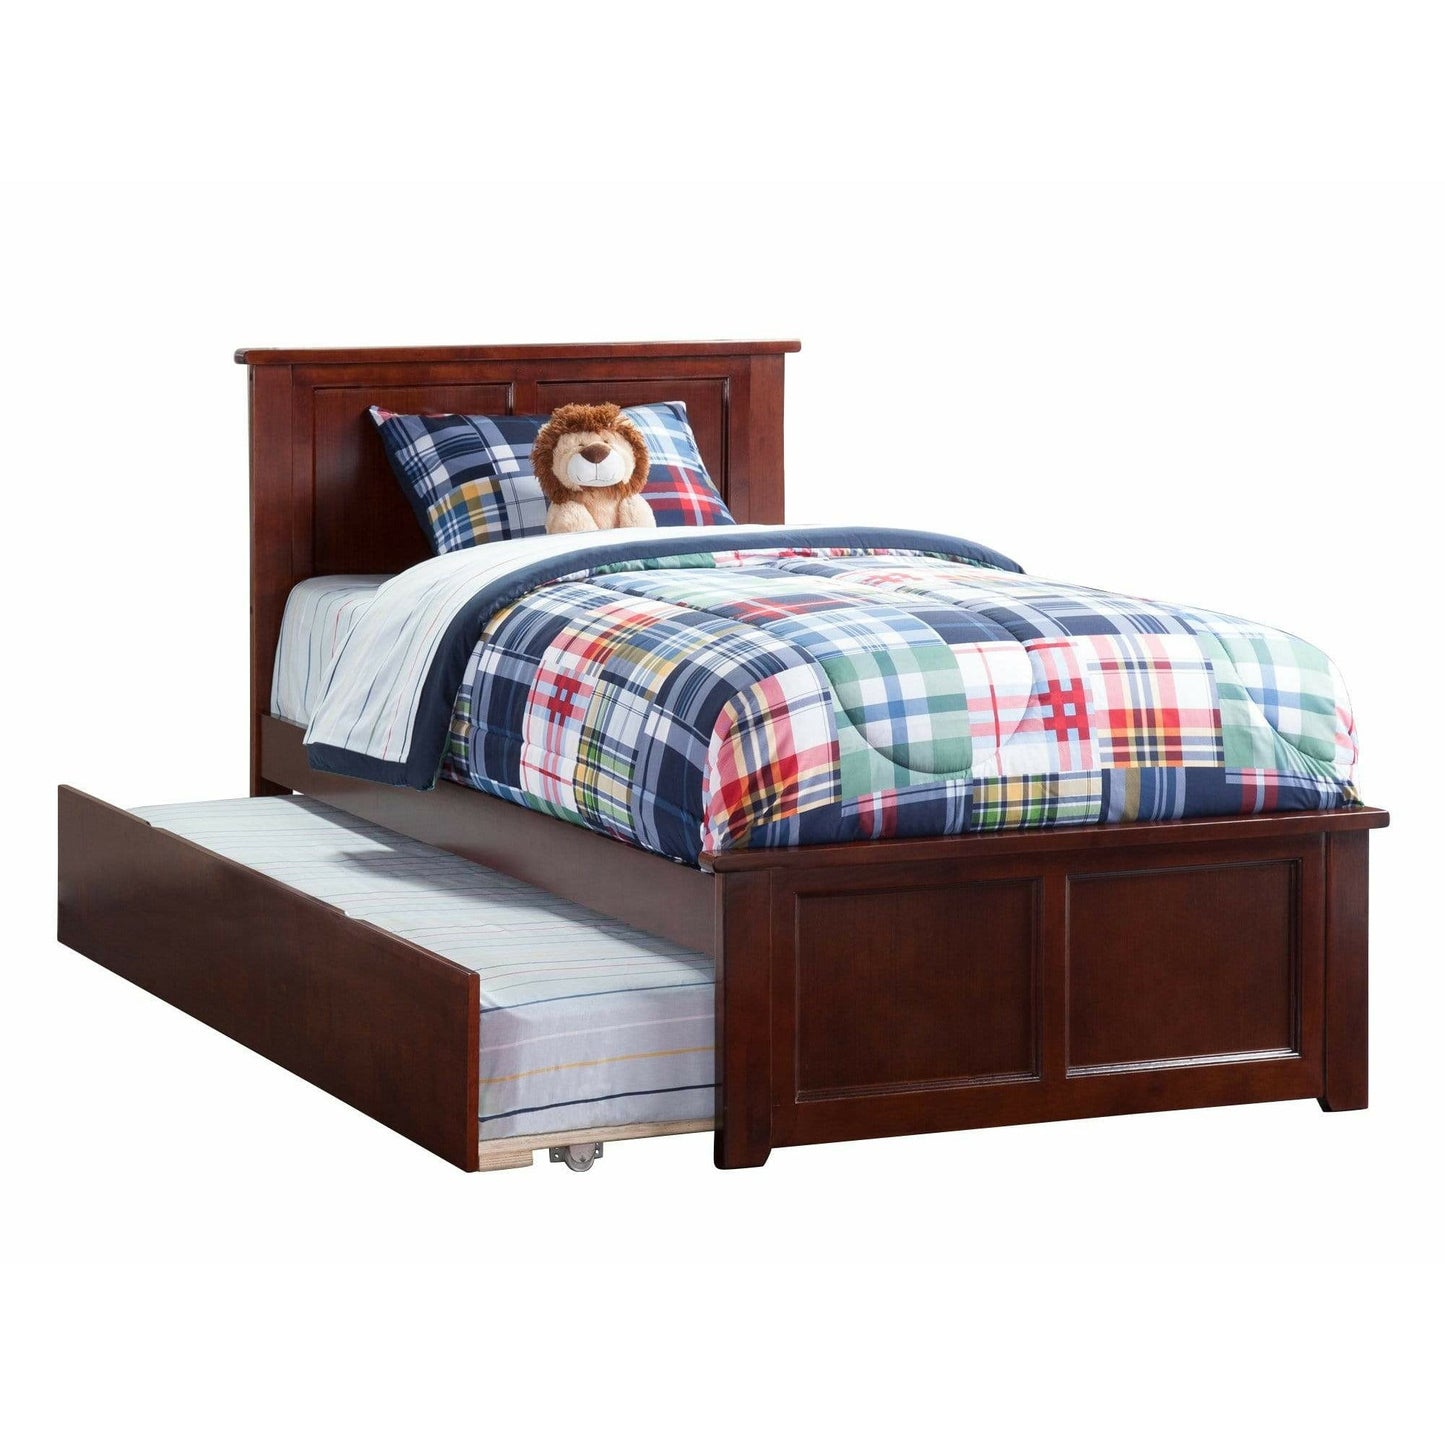 Atlantic Furniture Bed Walnut Madison Twin Platform Bed with Matching Foot Board with Twin Size Urban Trundle Bed in Espresso